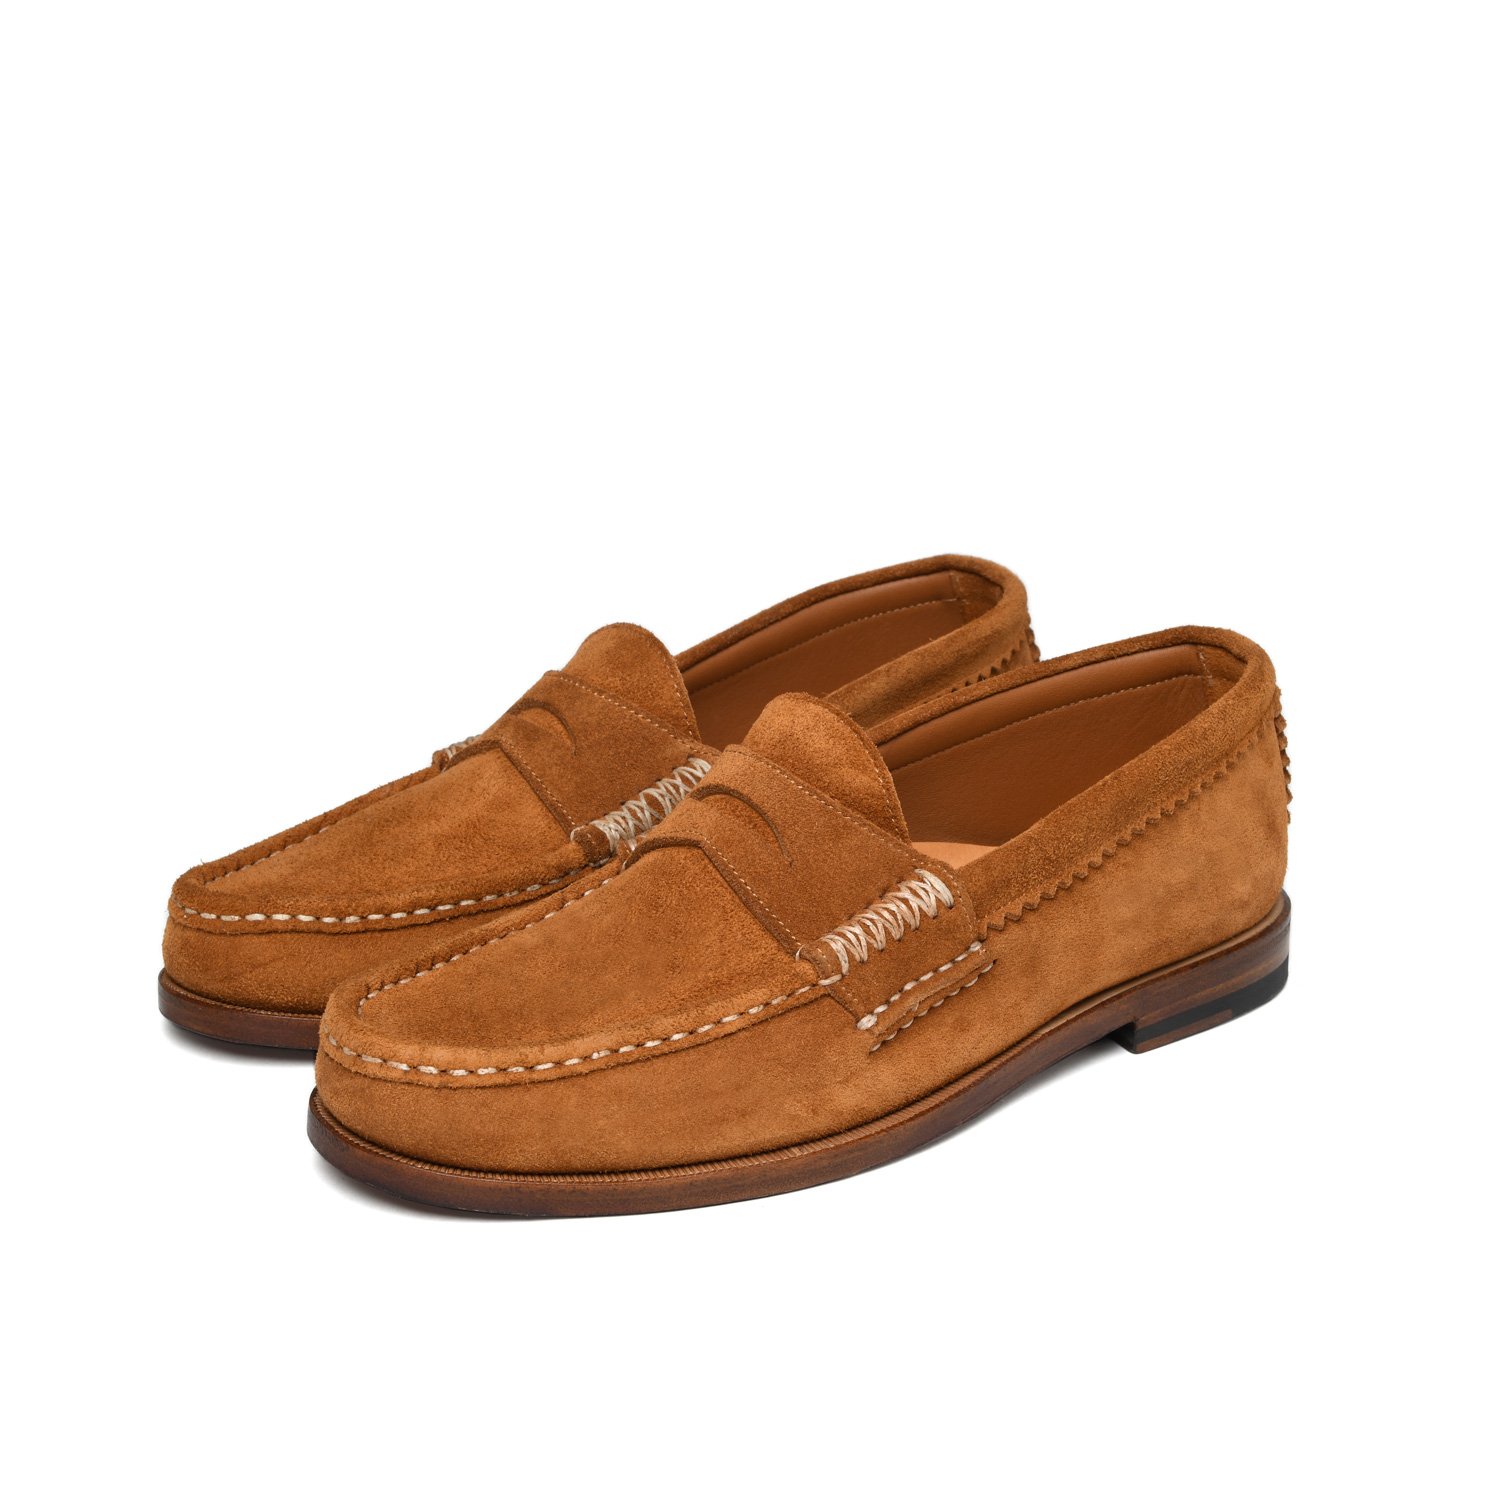 Robs-Loafer-w-Leather-Sole,-FO-G-Brown.jpg